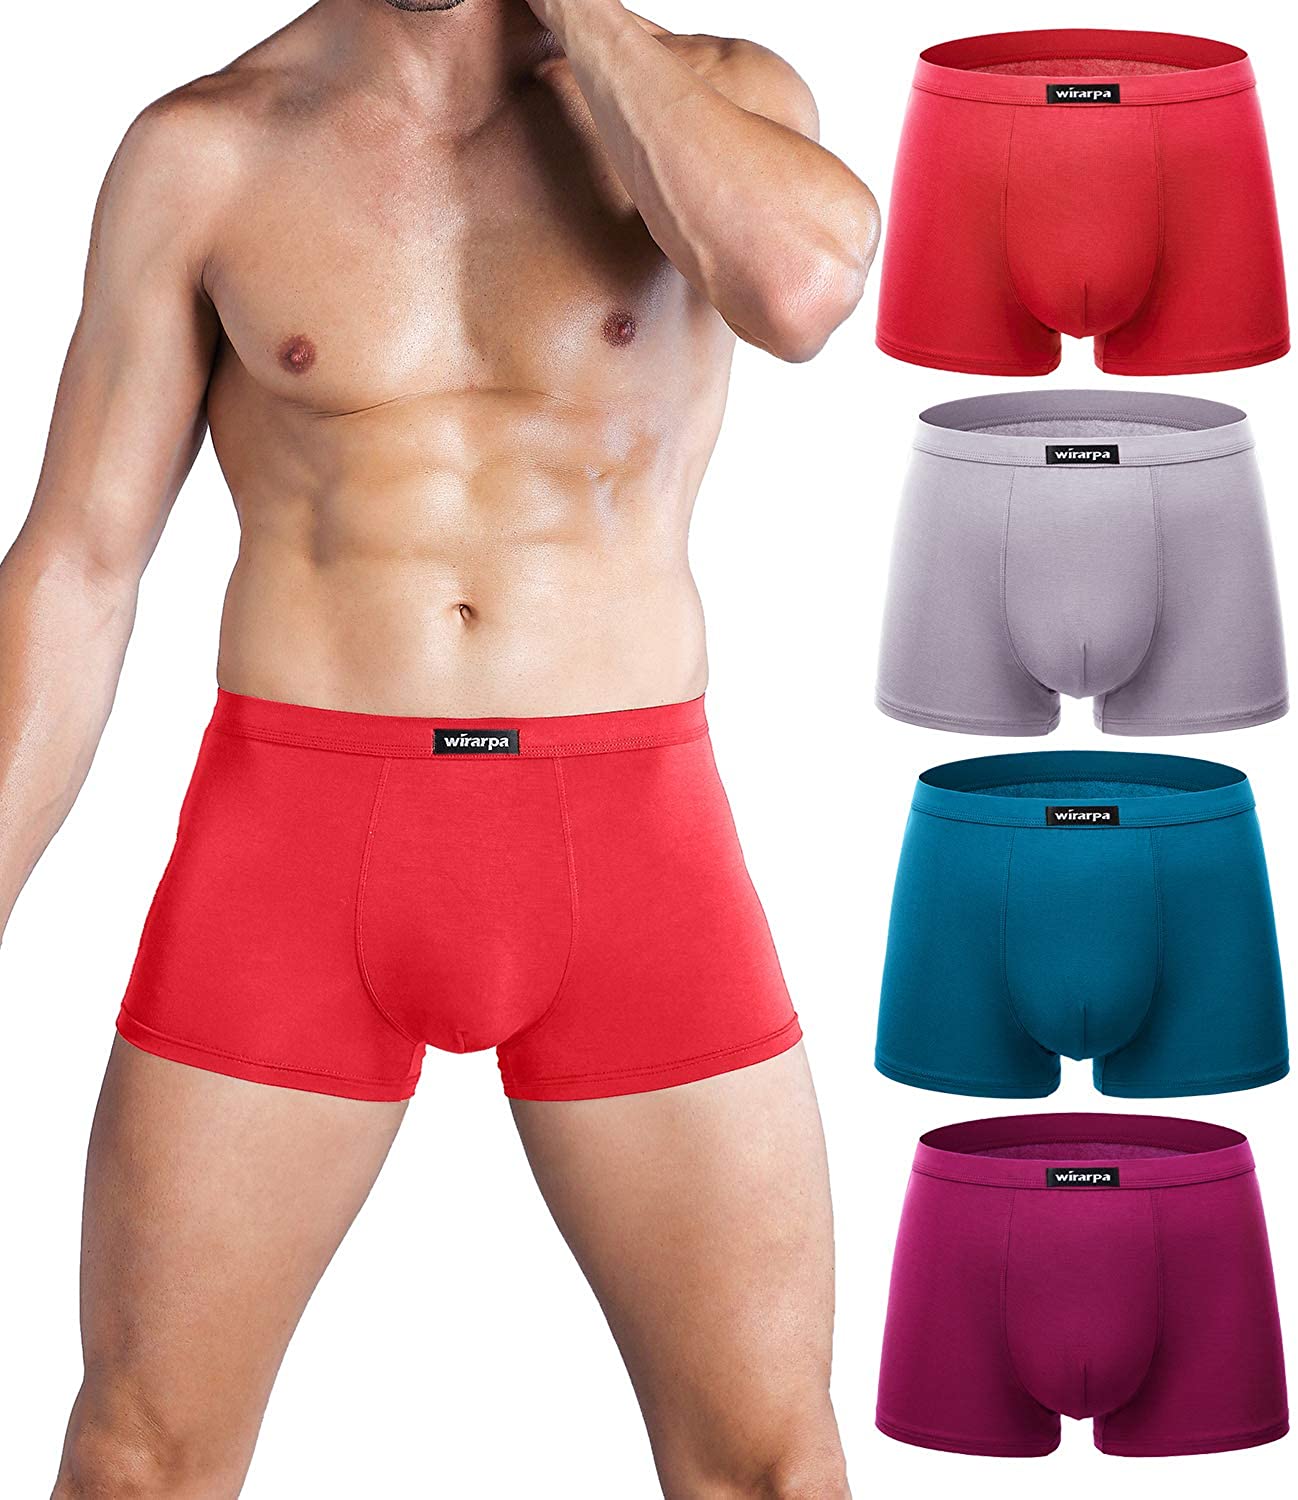  Wirarpa Mens Breathable Micro Modal Trunk Underwear Covered  Waistband Microfiber Underpants Short Leg Solid Color